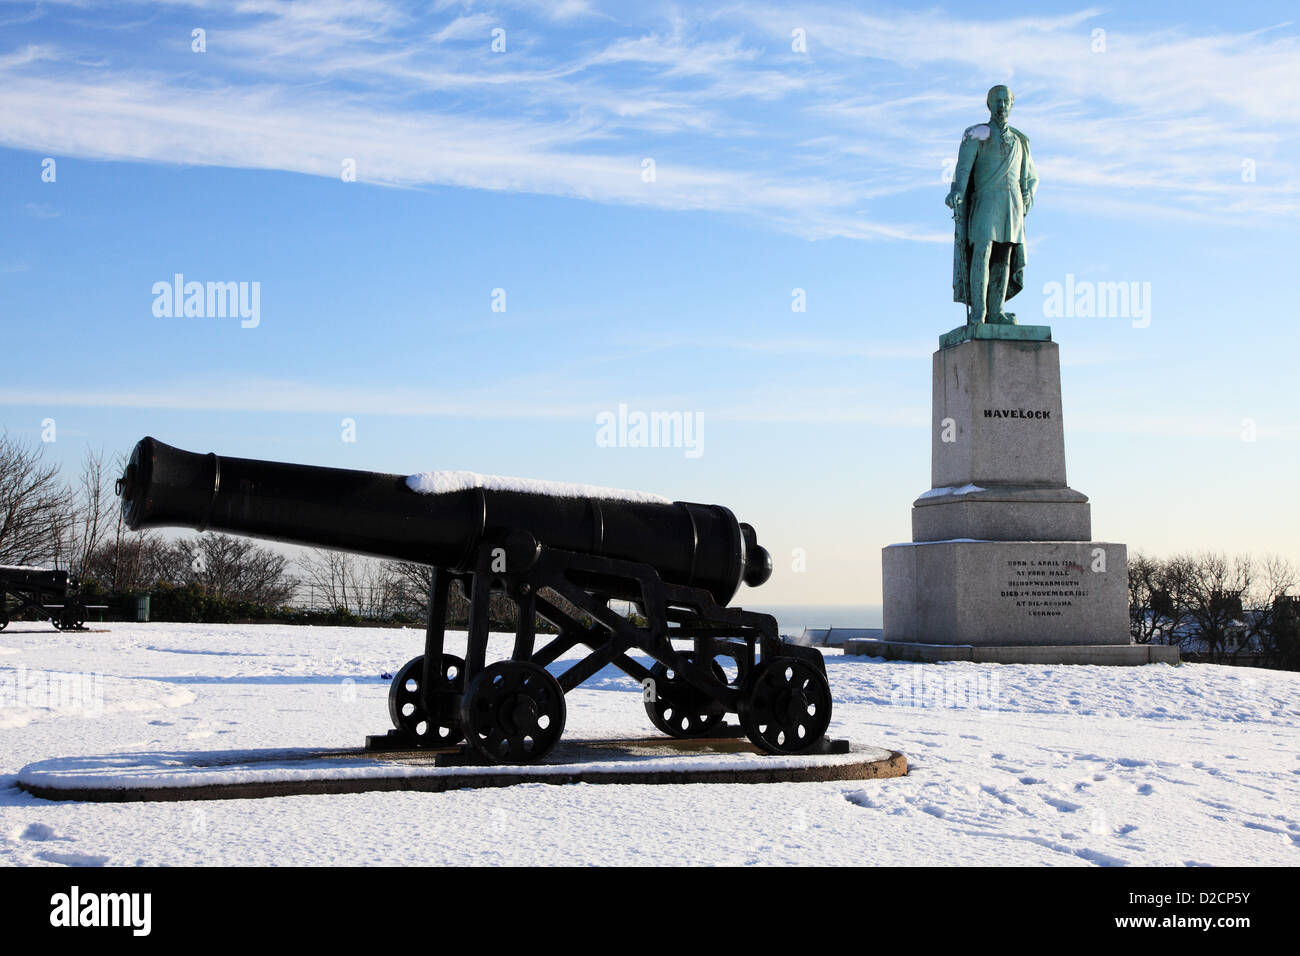 Replica cannon and Statue of Sir Henry Havelock within Mowbray Park Sunderland north east England UK Stock Photo